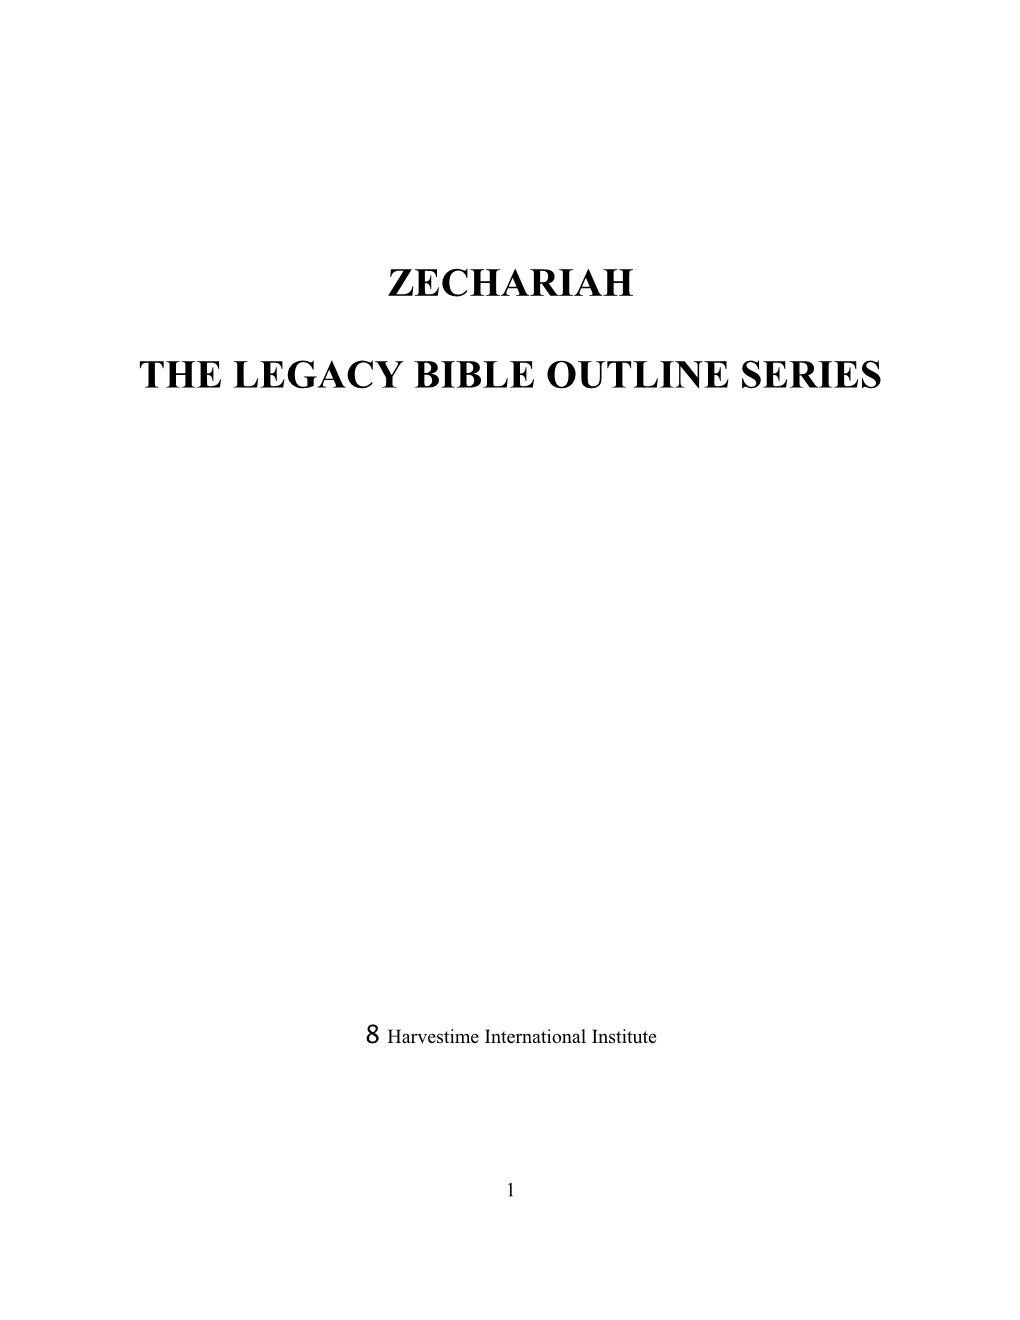 The Legacy Bible Outline Series